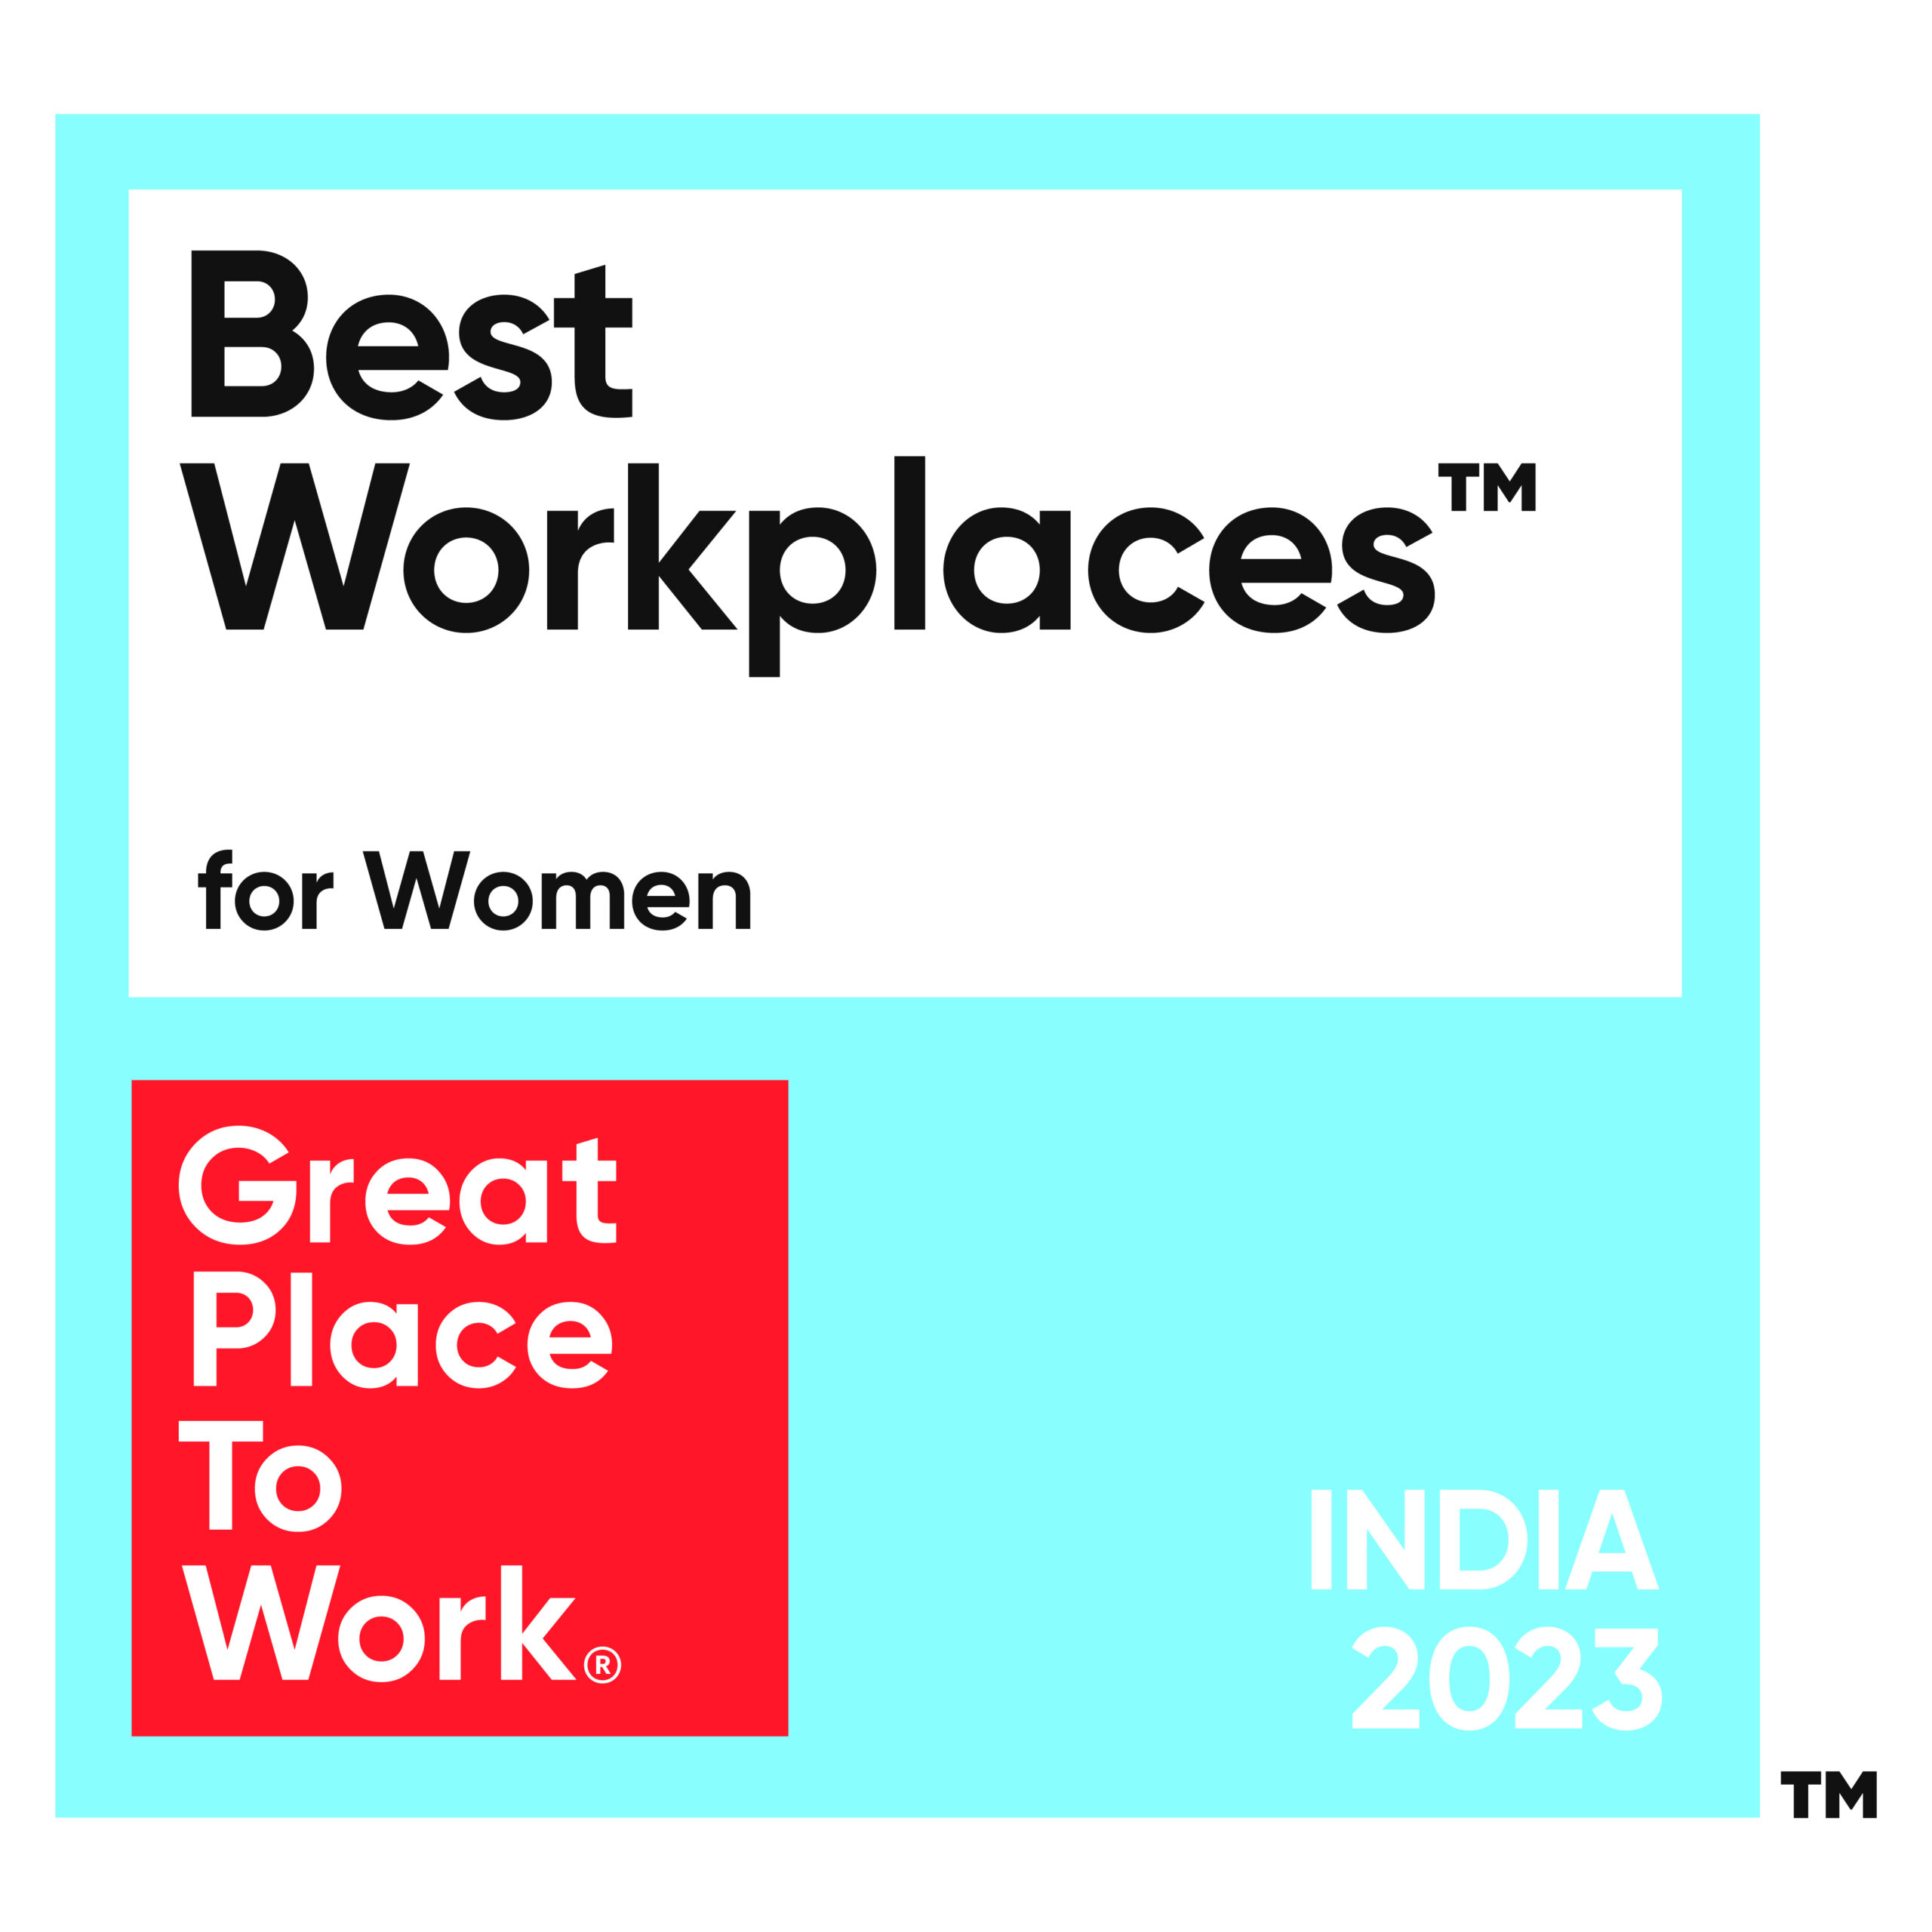 India's Best Workplaces for Women award 2023